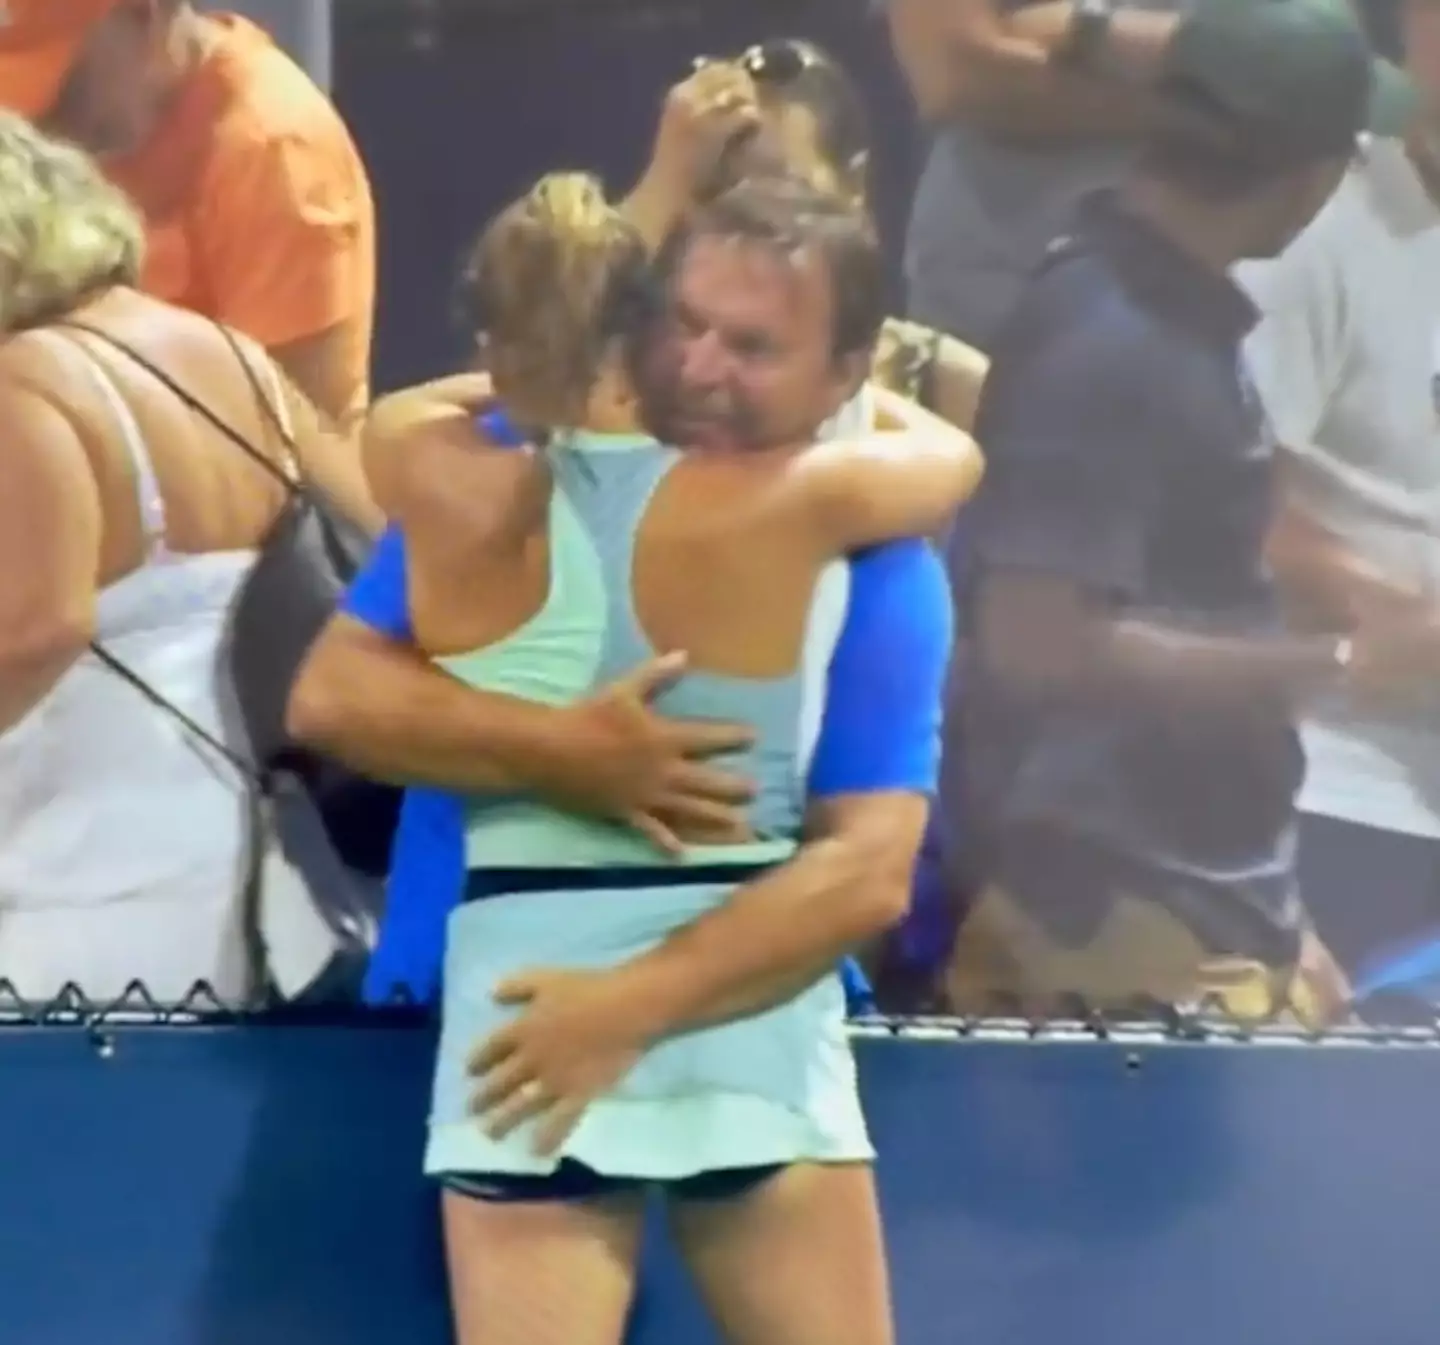 Bejlek celebrated with her dad after her victory.